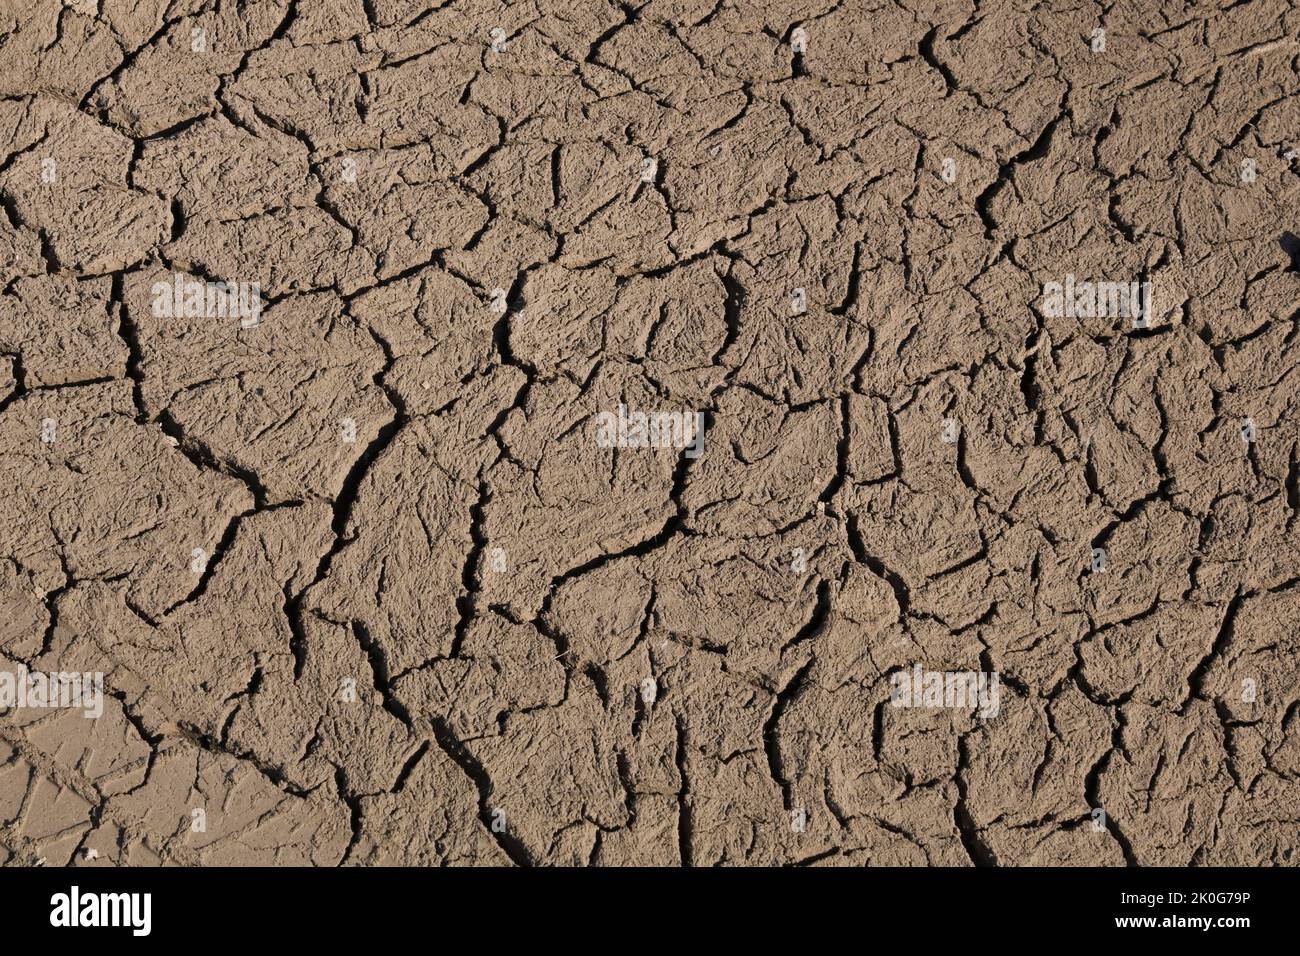 Close-up of cracked and dried mud. Stock Photo